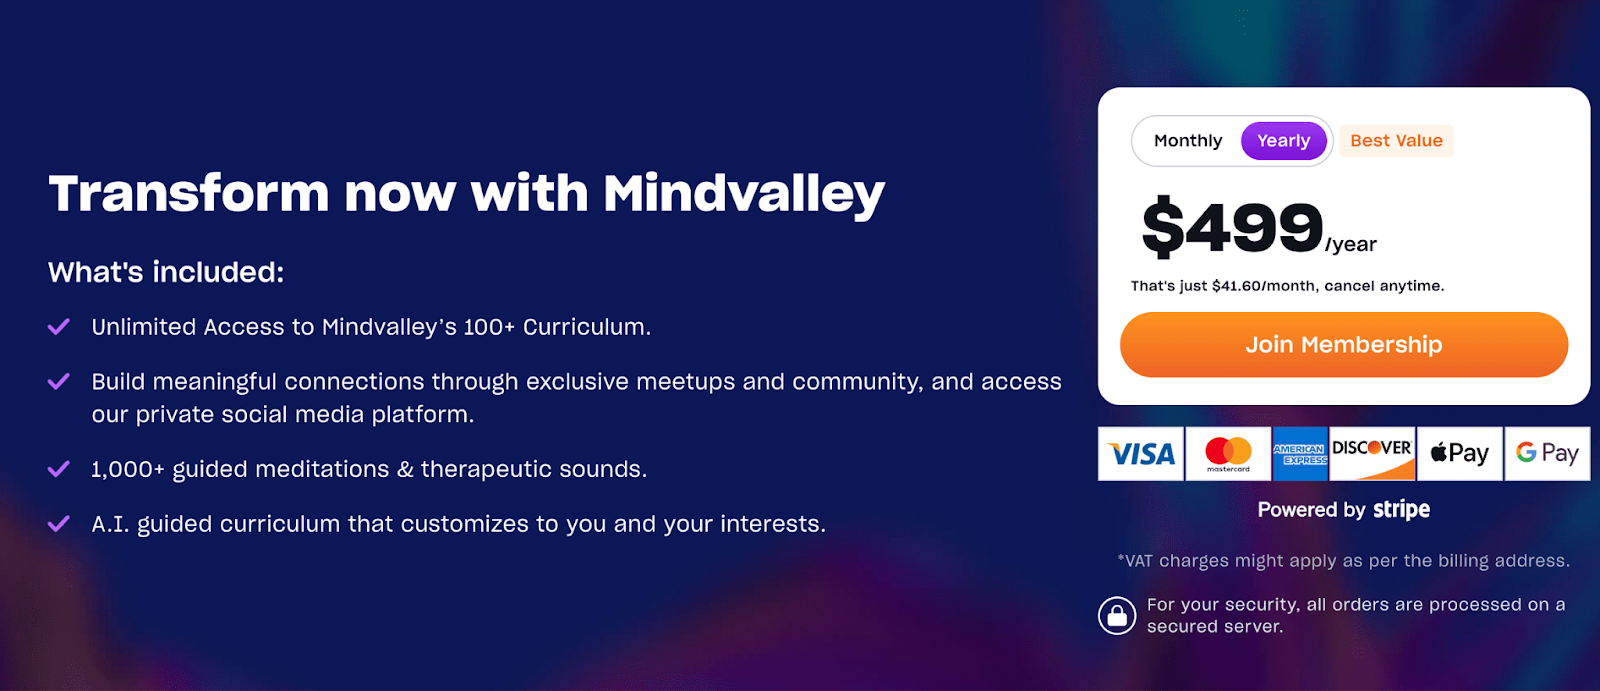 Mindvalley pricing plans